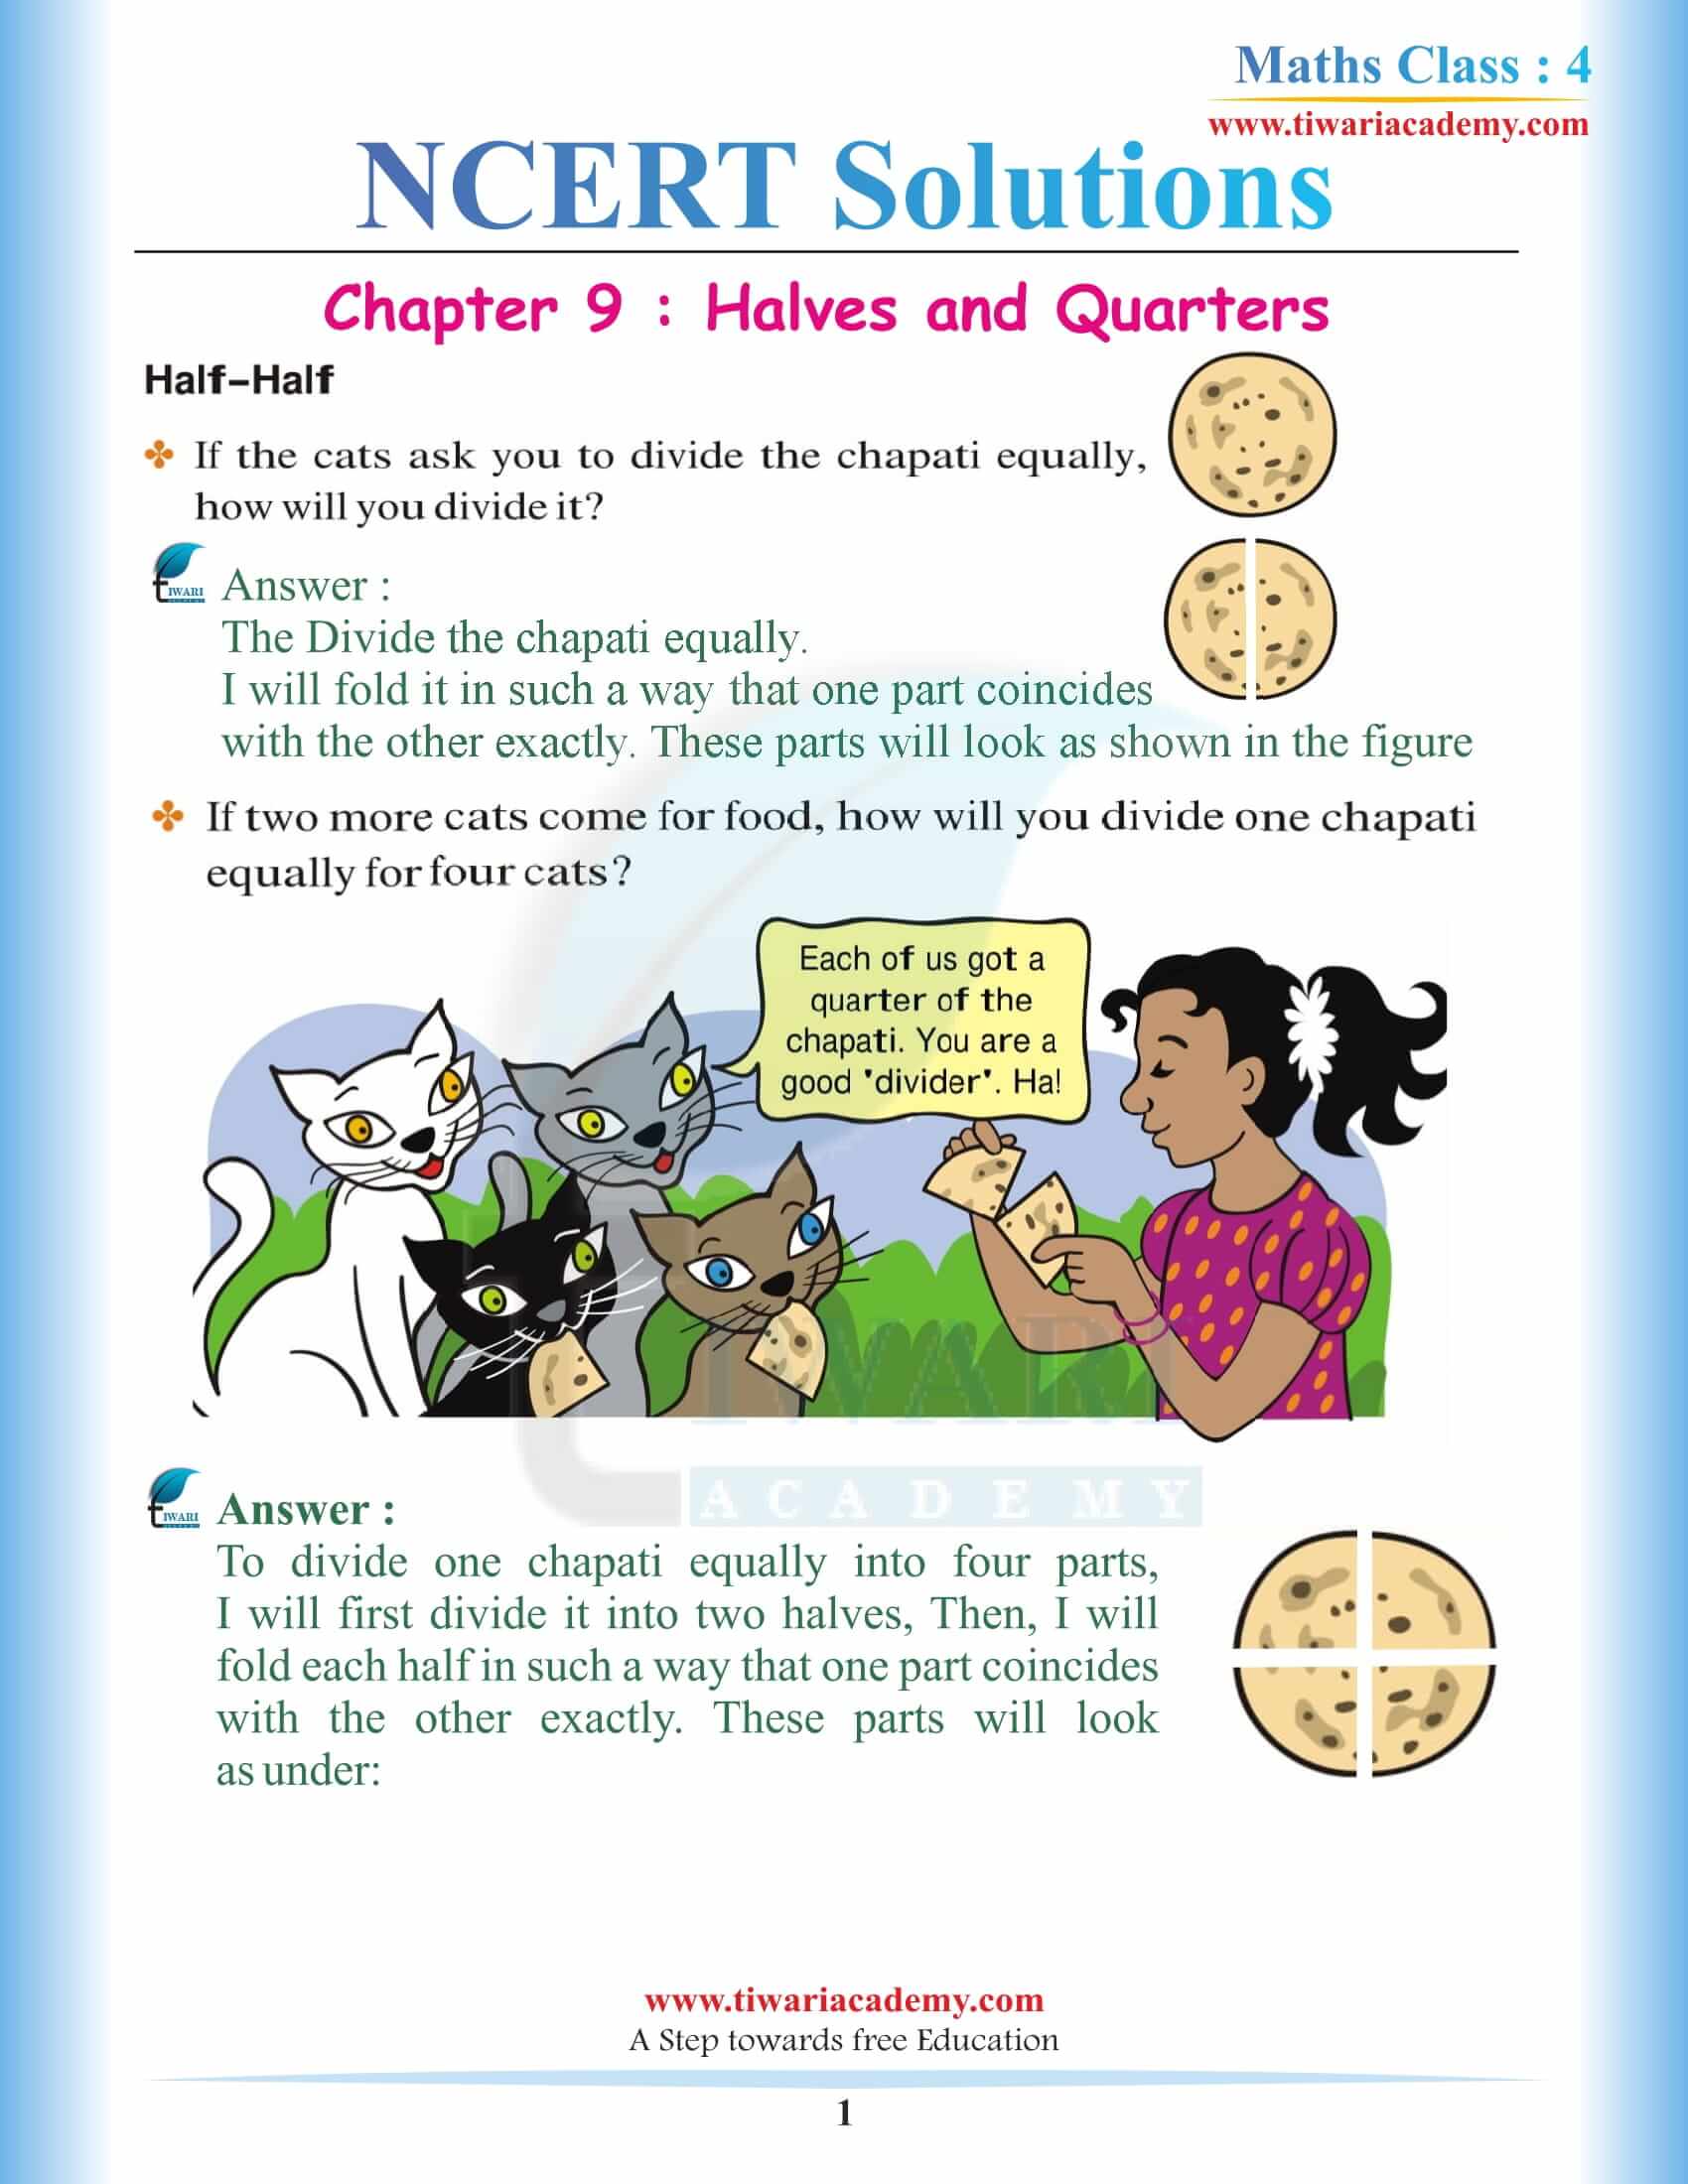 NCERT Solutions for Class 4 Maths Chapter 9 Halves and Quarters